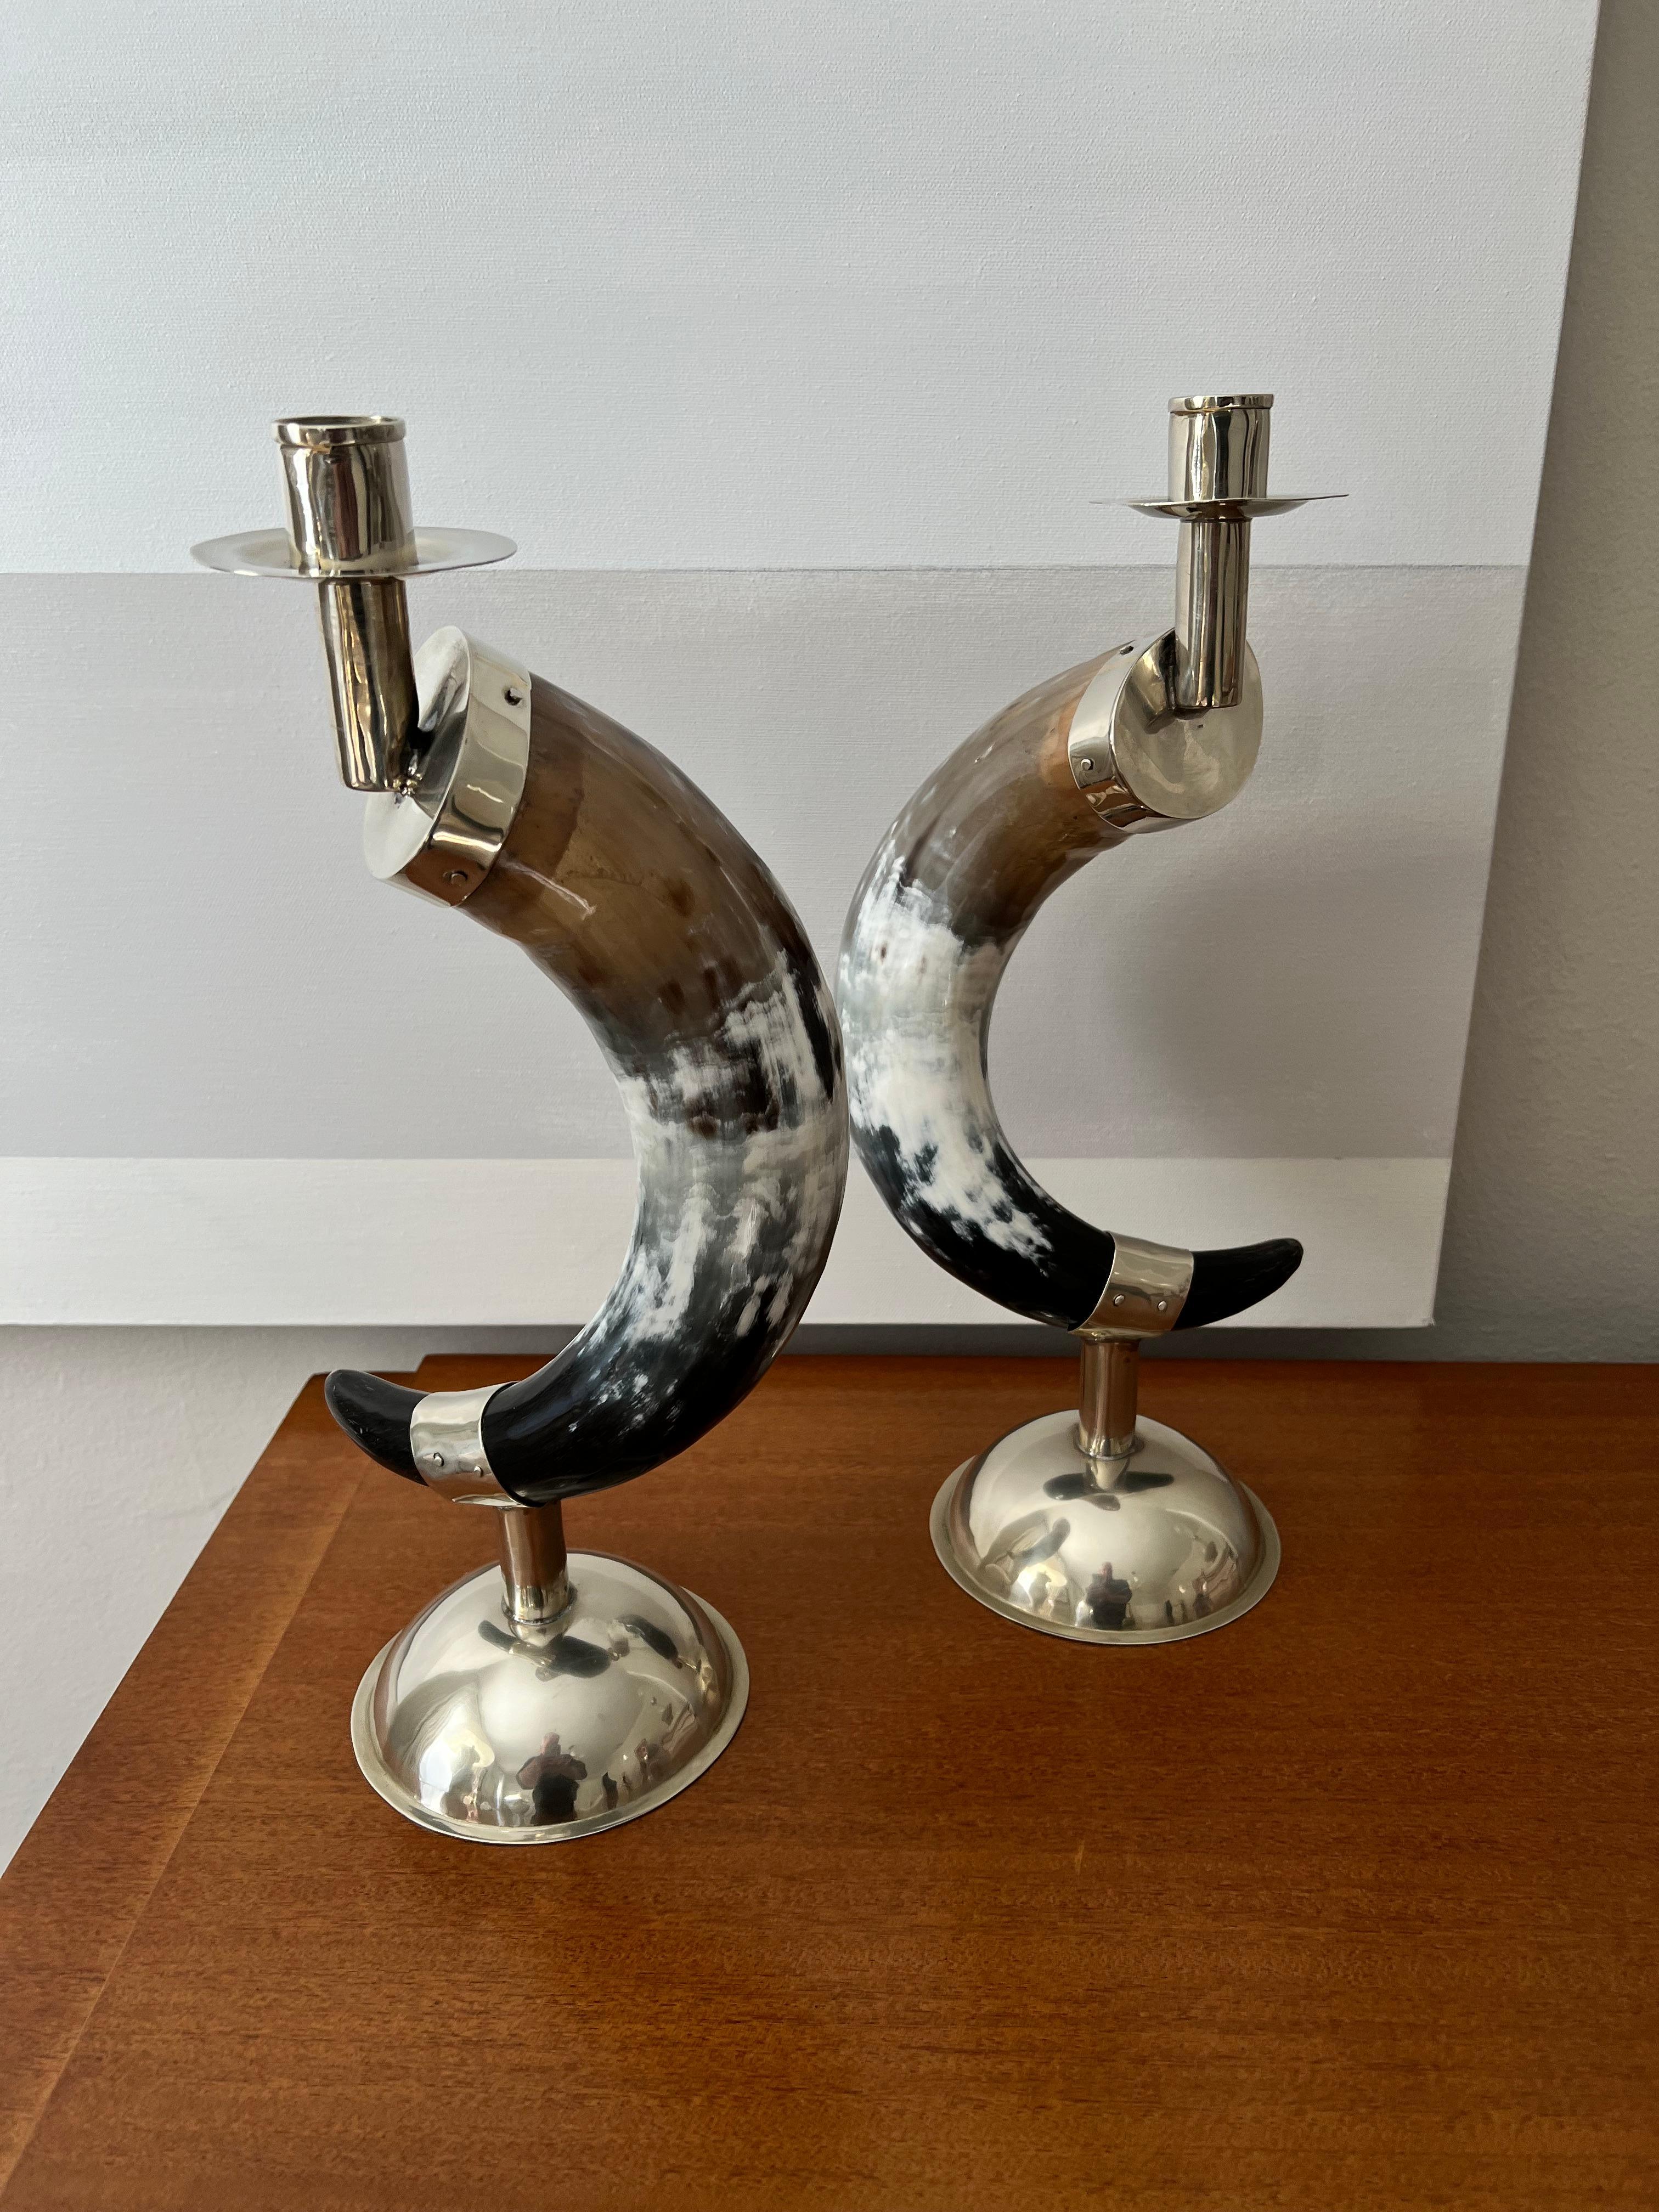 Pair of English horn candlesticks with hand crafted silver plate base and holders. The pair are exquisitely done and are stunning. 

A compliment in many settings and would work well with Modern and clean to maximal homes with traditional or